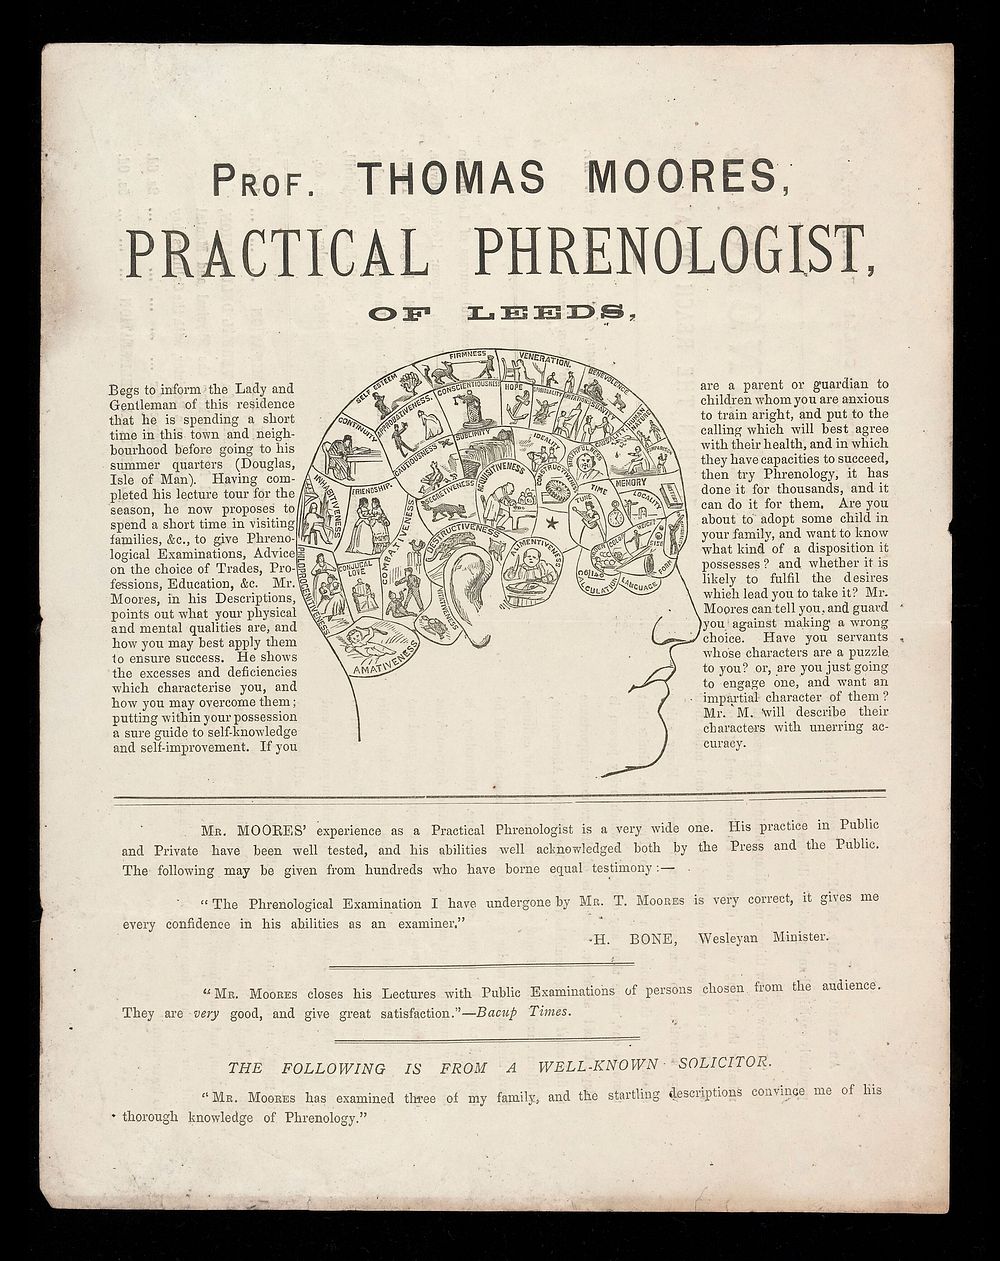 Phrenology within the reach of all : to the lady or gentleman of this house, with Mr. Moores' compliments / Thomas Moores.